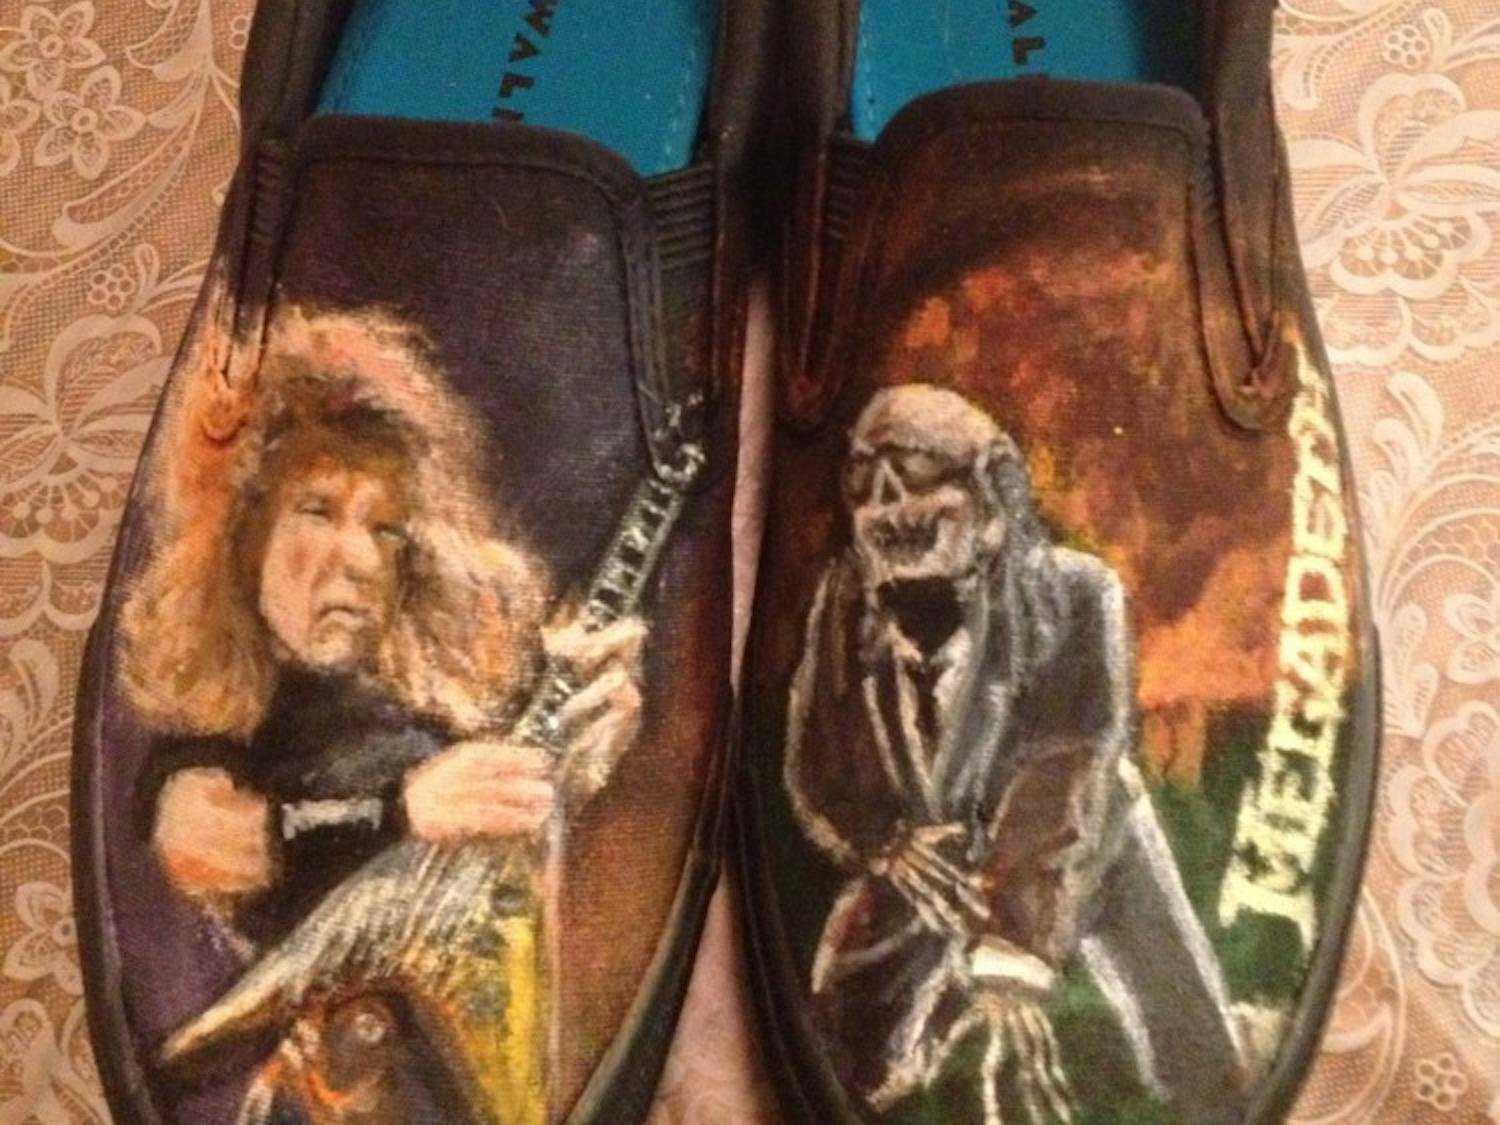 Megadeth, a classic rock band, themed canvas shoes. Acrylic paint was used. Photo by Alec Damiano.